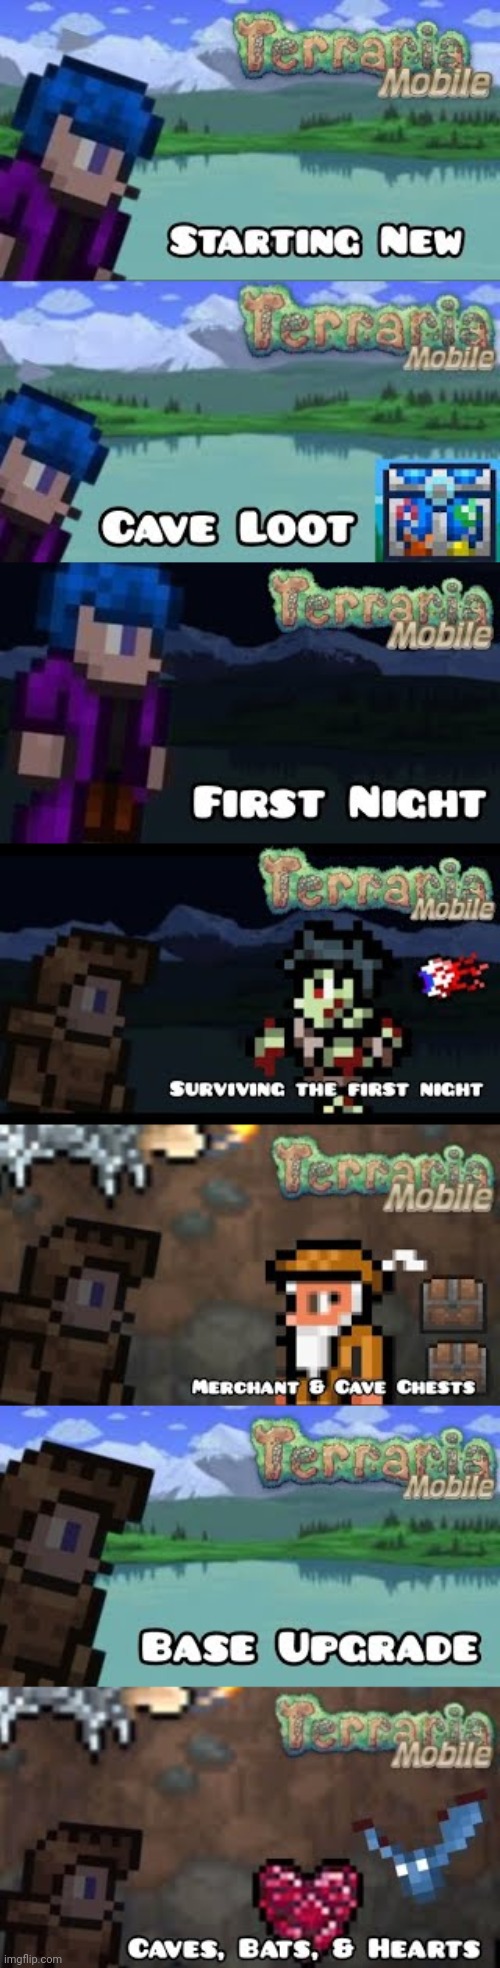 My YouTube terraria mobile series so far | image tagged in terraria,gaming,video games,youtube,videos,thumbnails | made w/ Imgflip meme maker